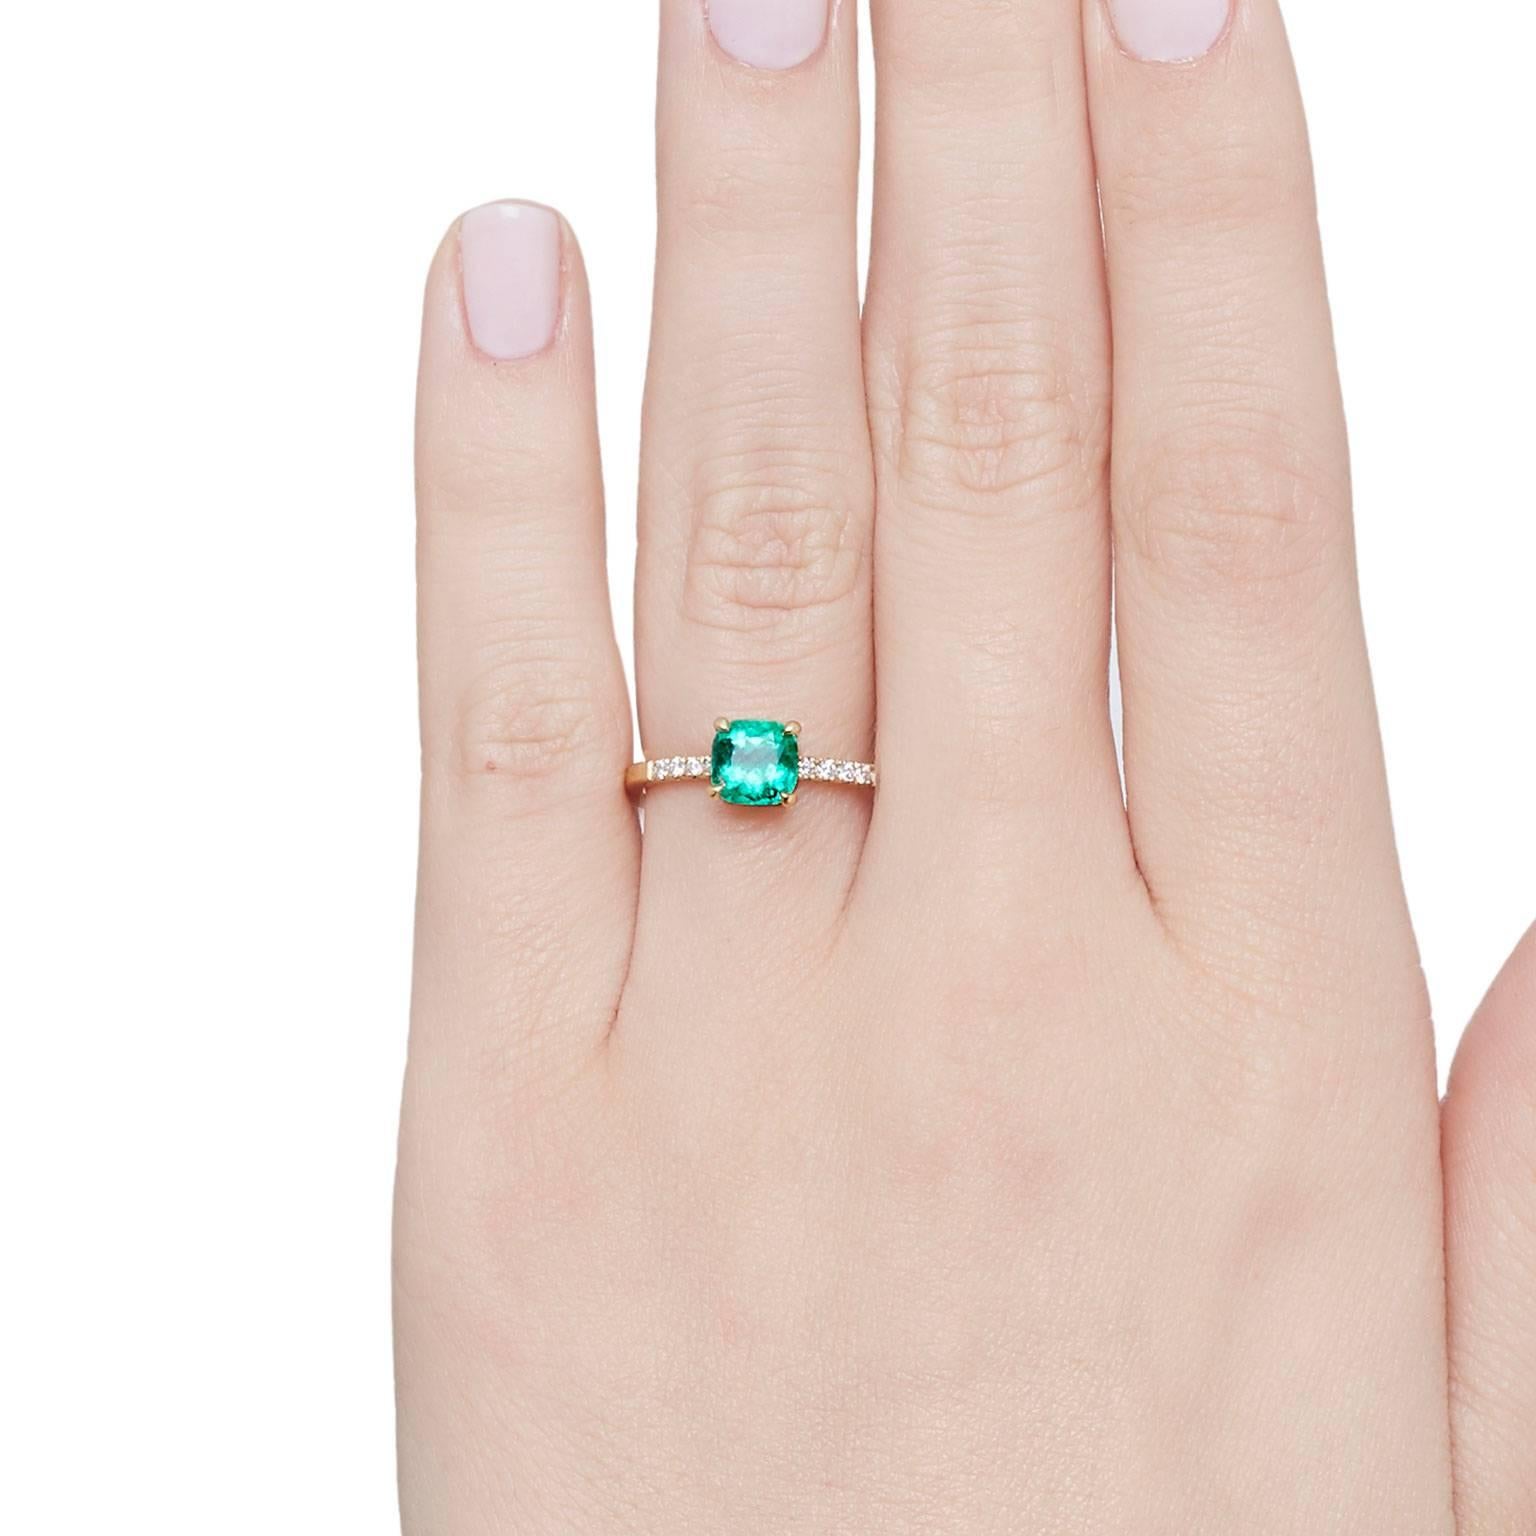 Cushla Whiting 0.89 Carat Muzo Emerald, Diamond & 18 Karat Gold Engagement Ring In New Condition For Sale In Melbourne, AU